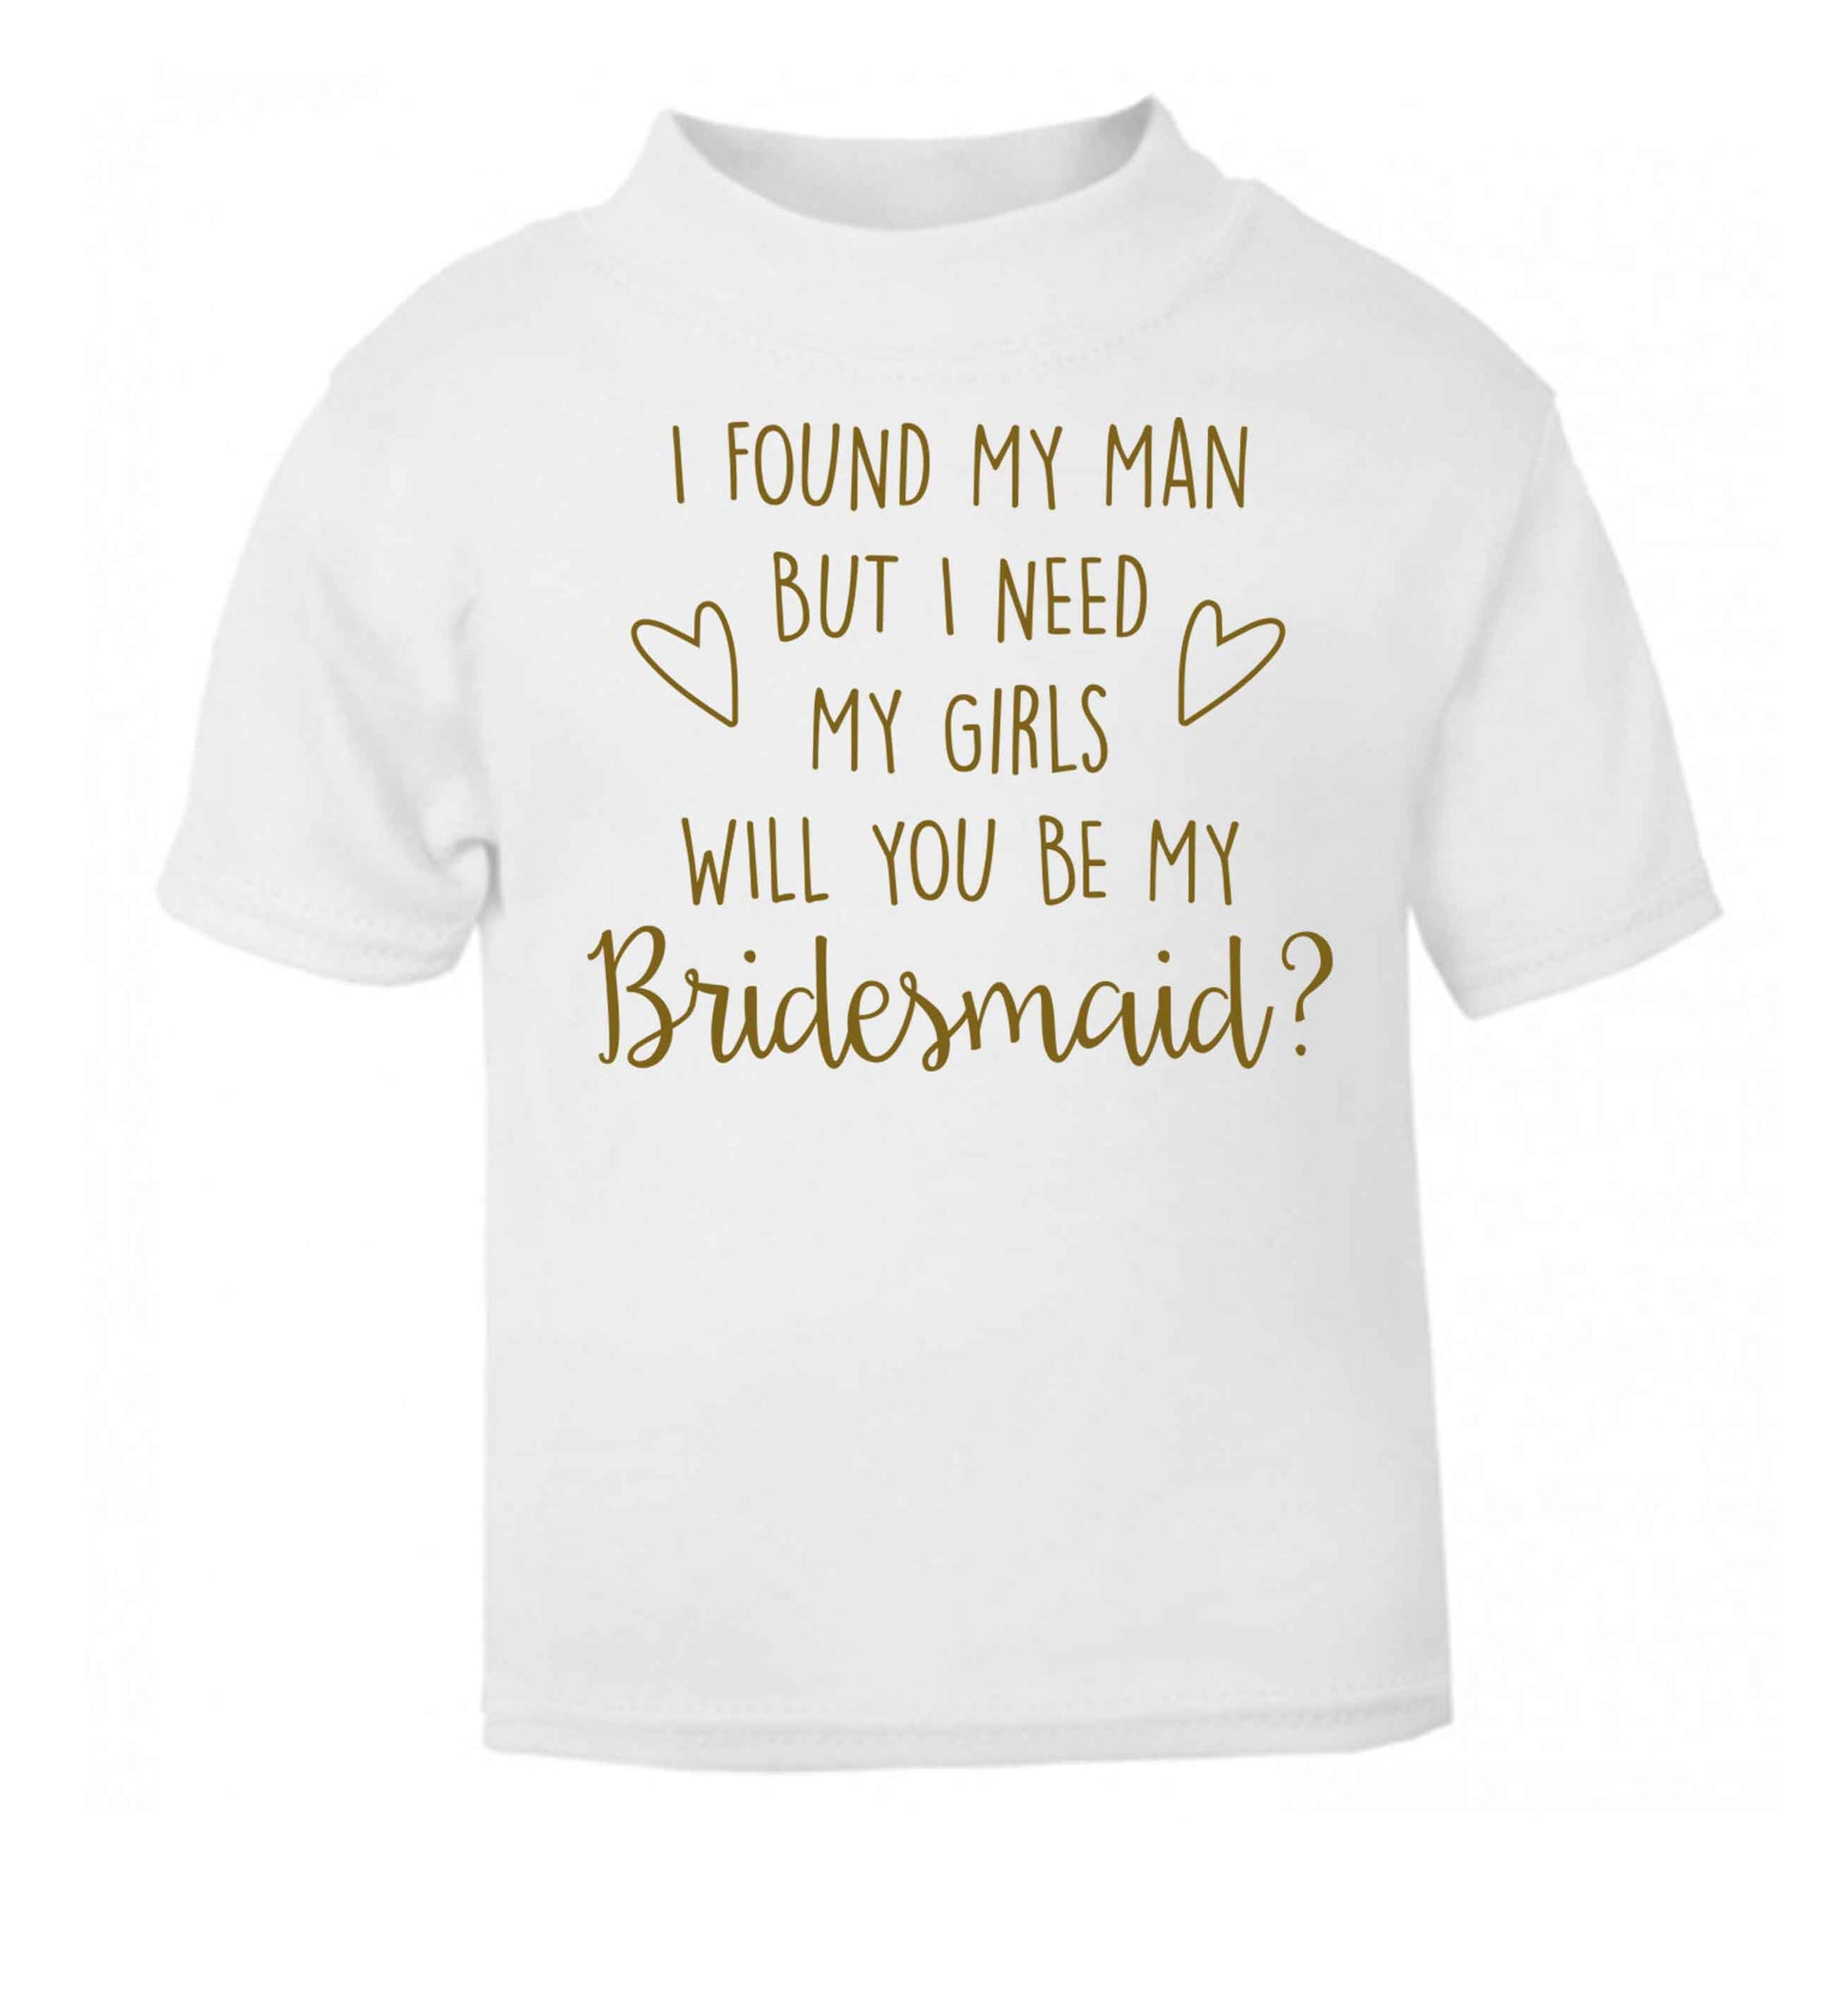 I found my man but I need my girls will you be my bridesmaid? white baby toddler Tshirt 2 Years